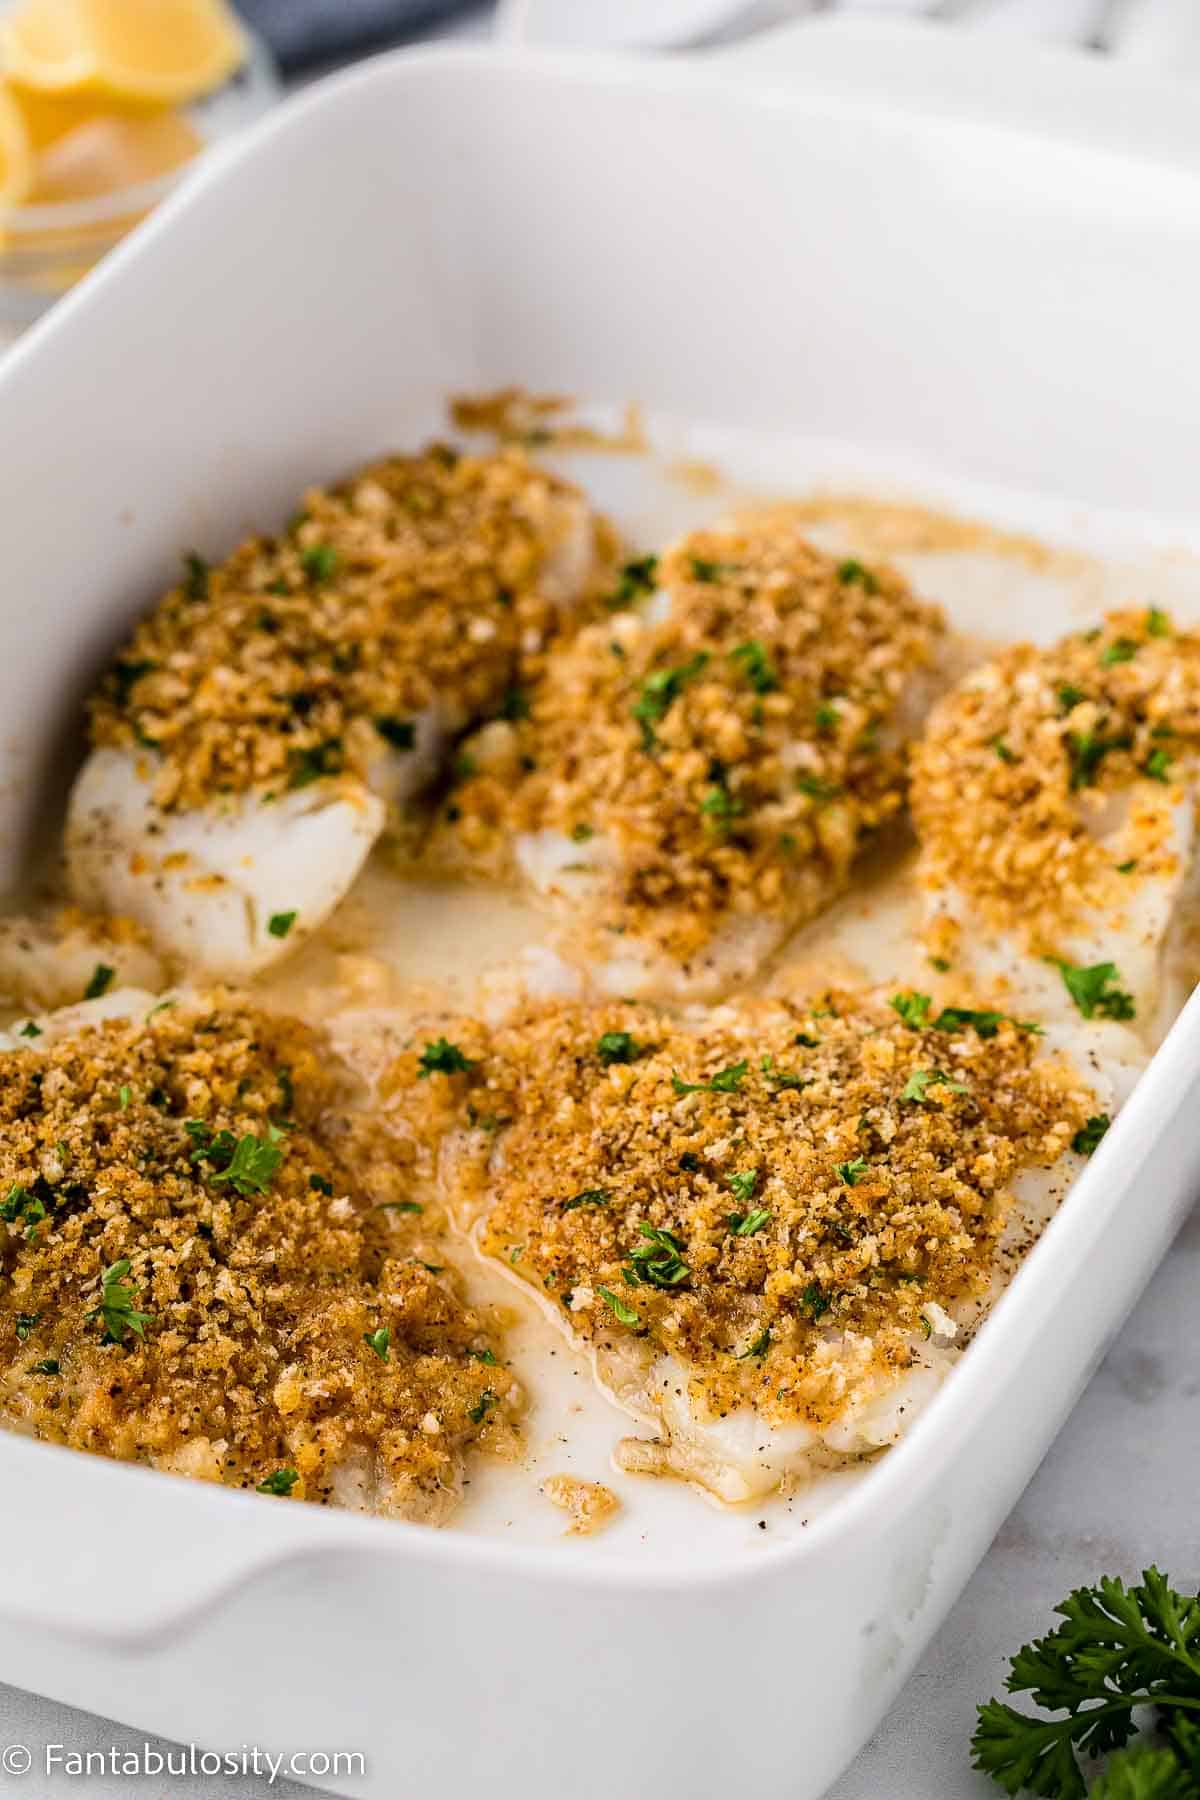 Baked cod filets with panko crusted seasoning.